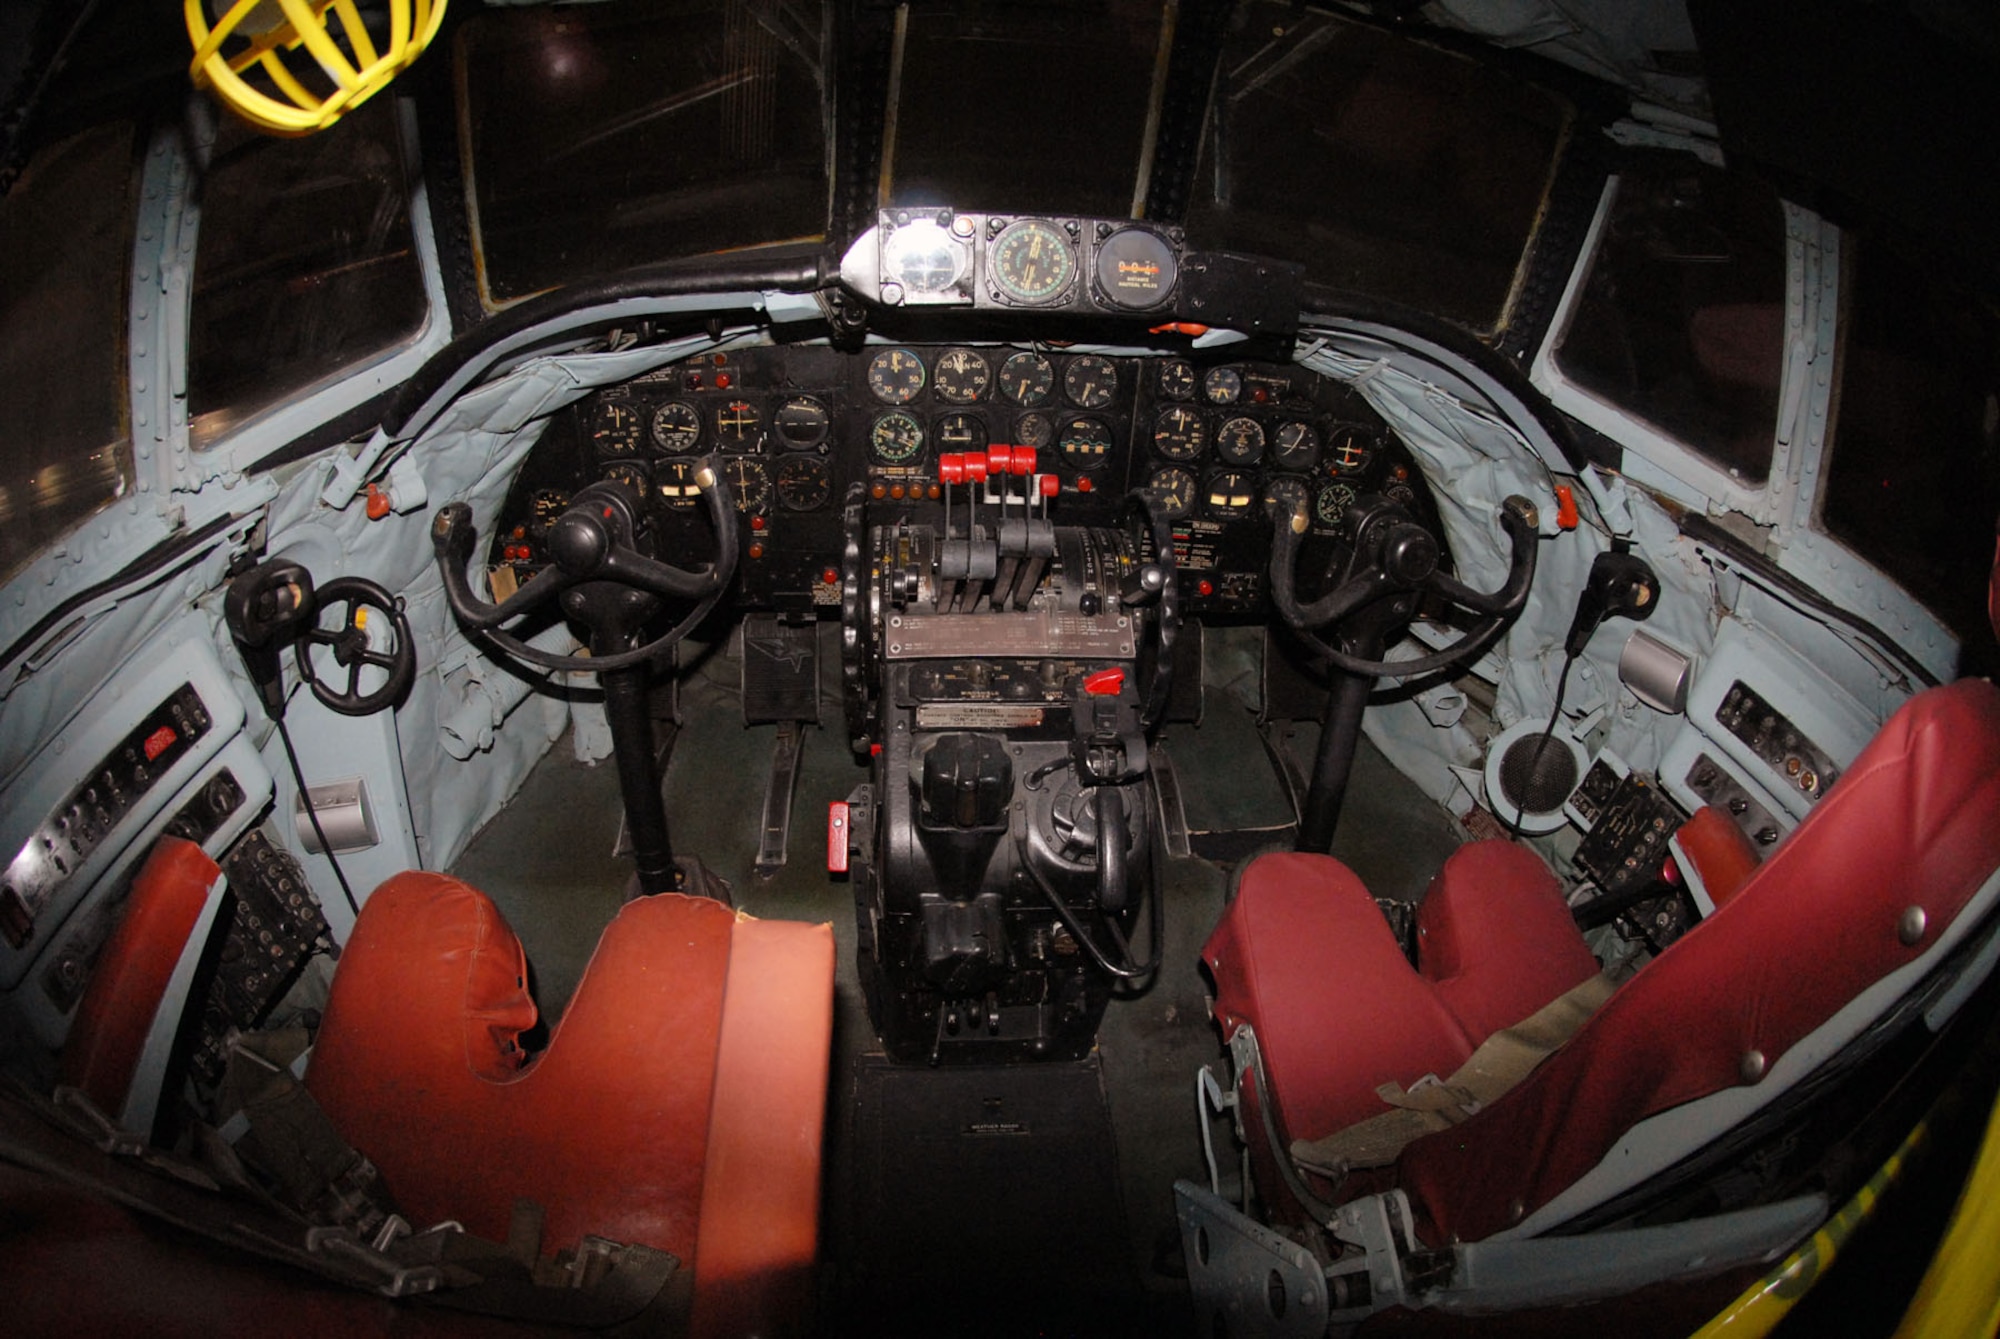 DAYTON, Ohio -- Lockheed EC-121D cockpit at the National Museum of the United States Air Force. (U.S. Air Force photo)